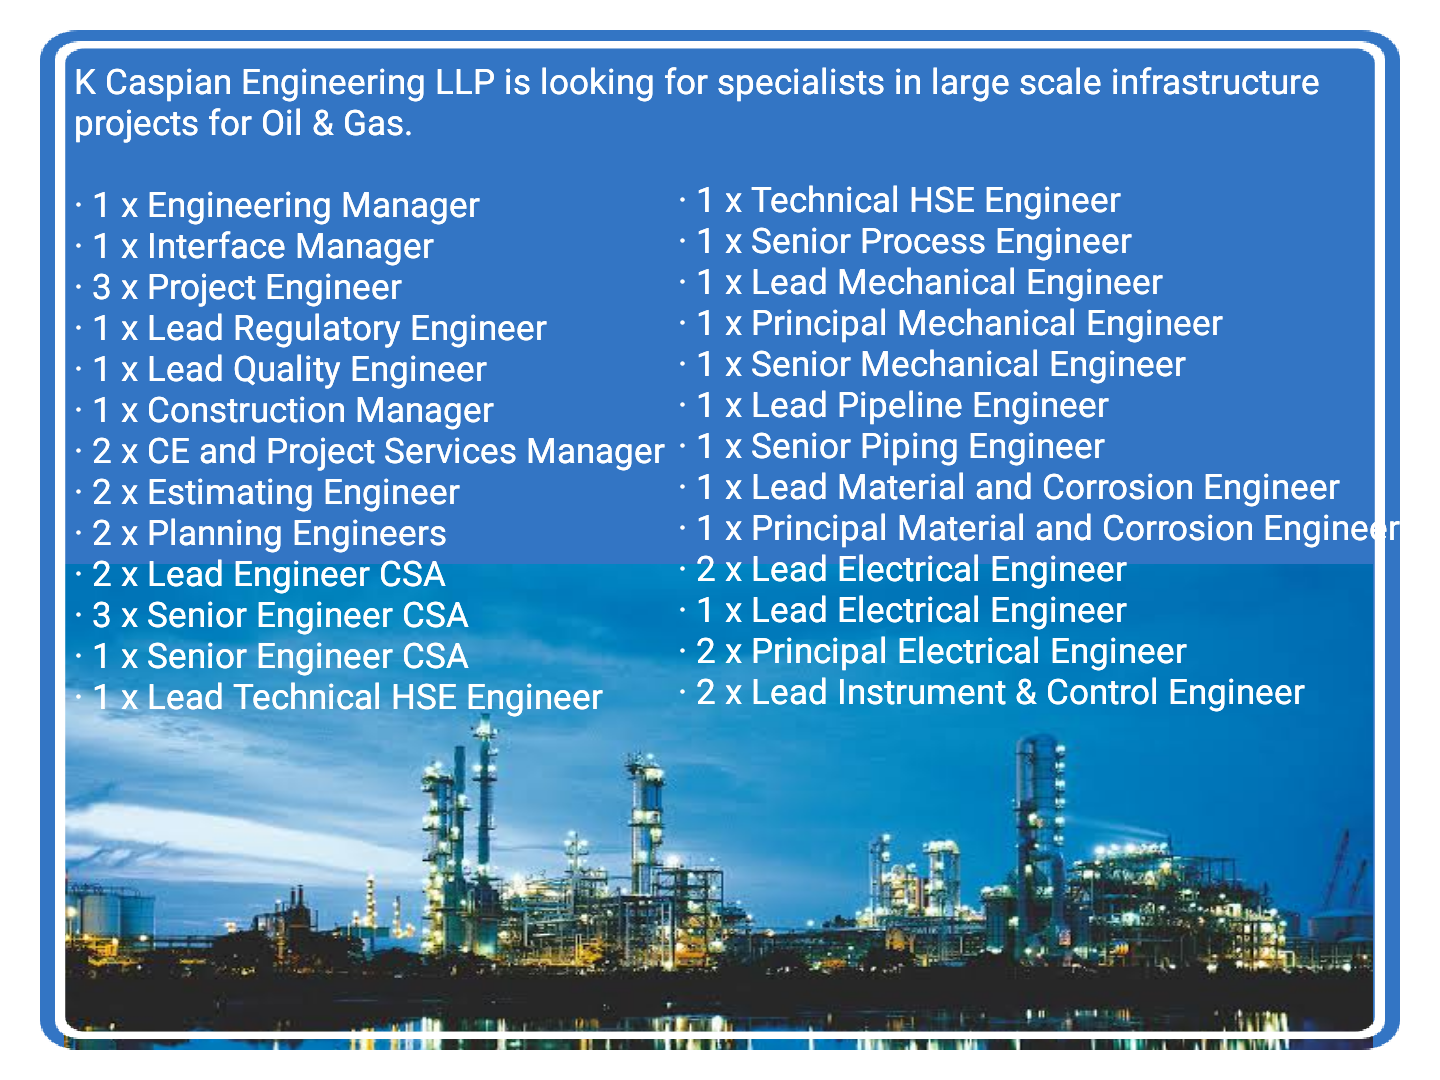 Oil & Gas Infrastructure Project Jobs